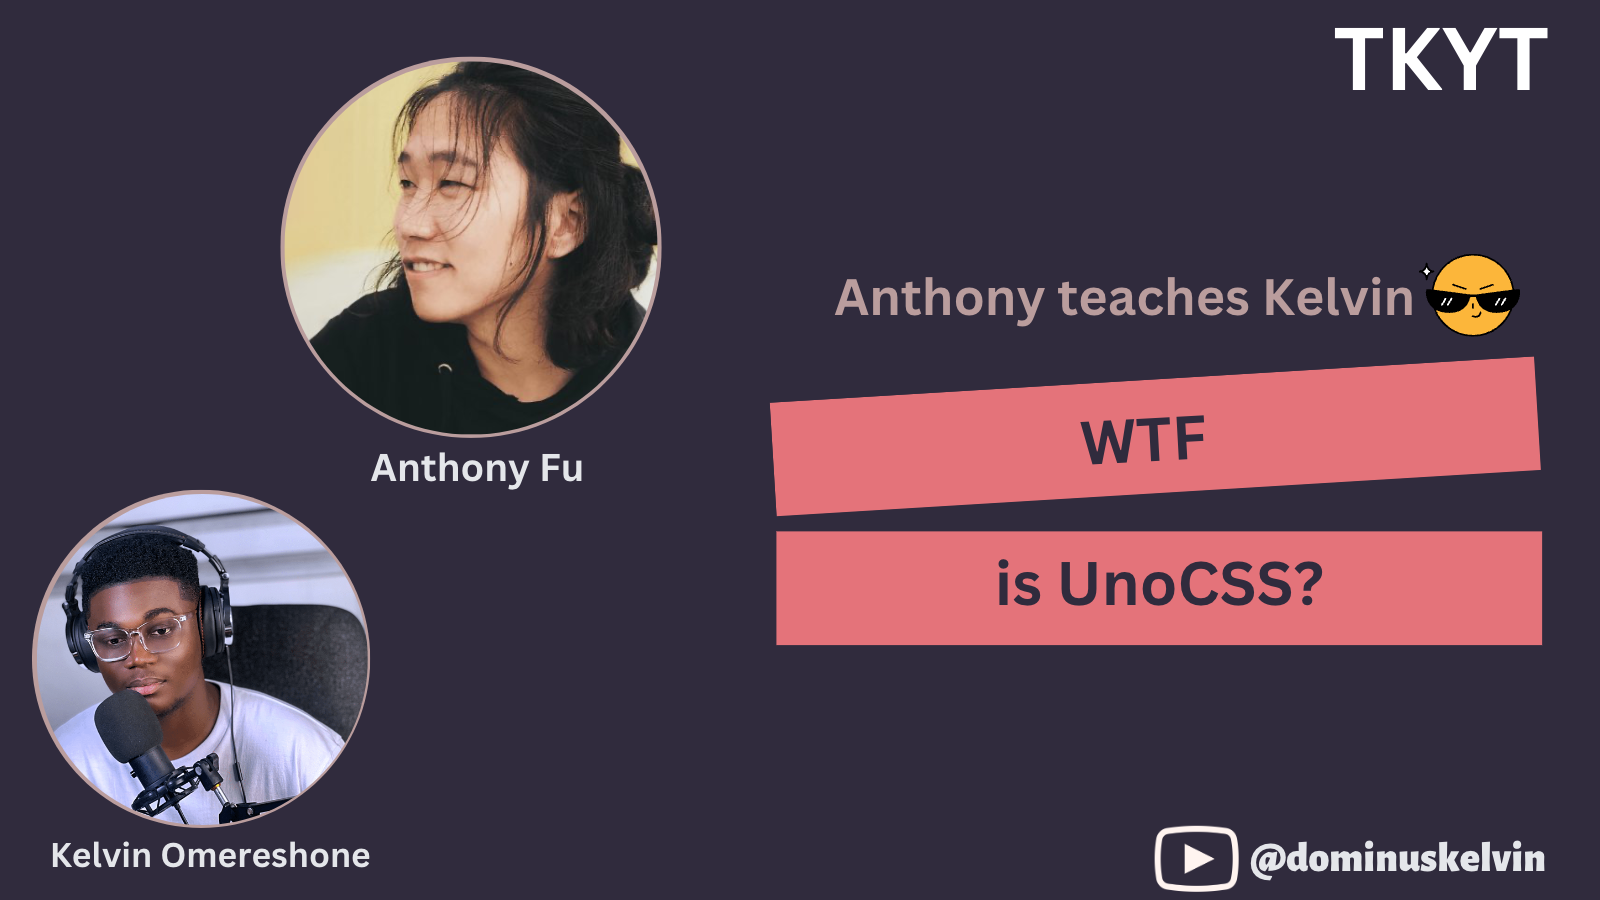 WTF is UnoCSS?